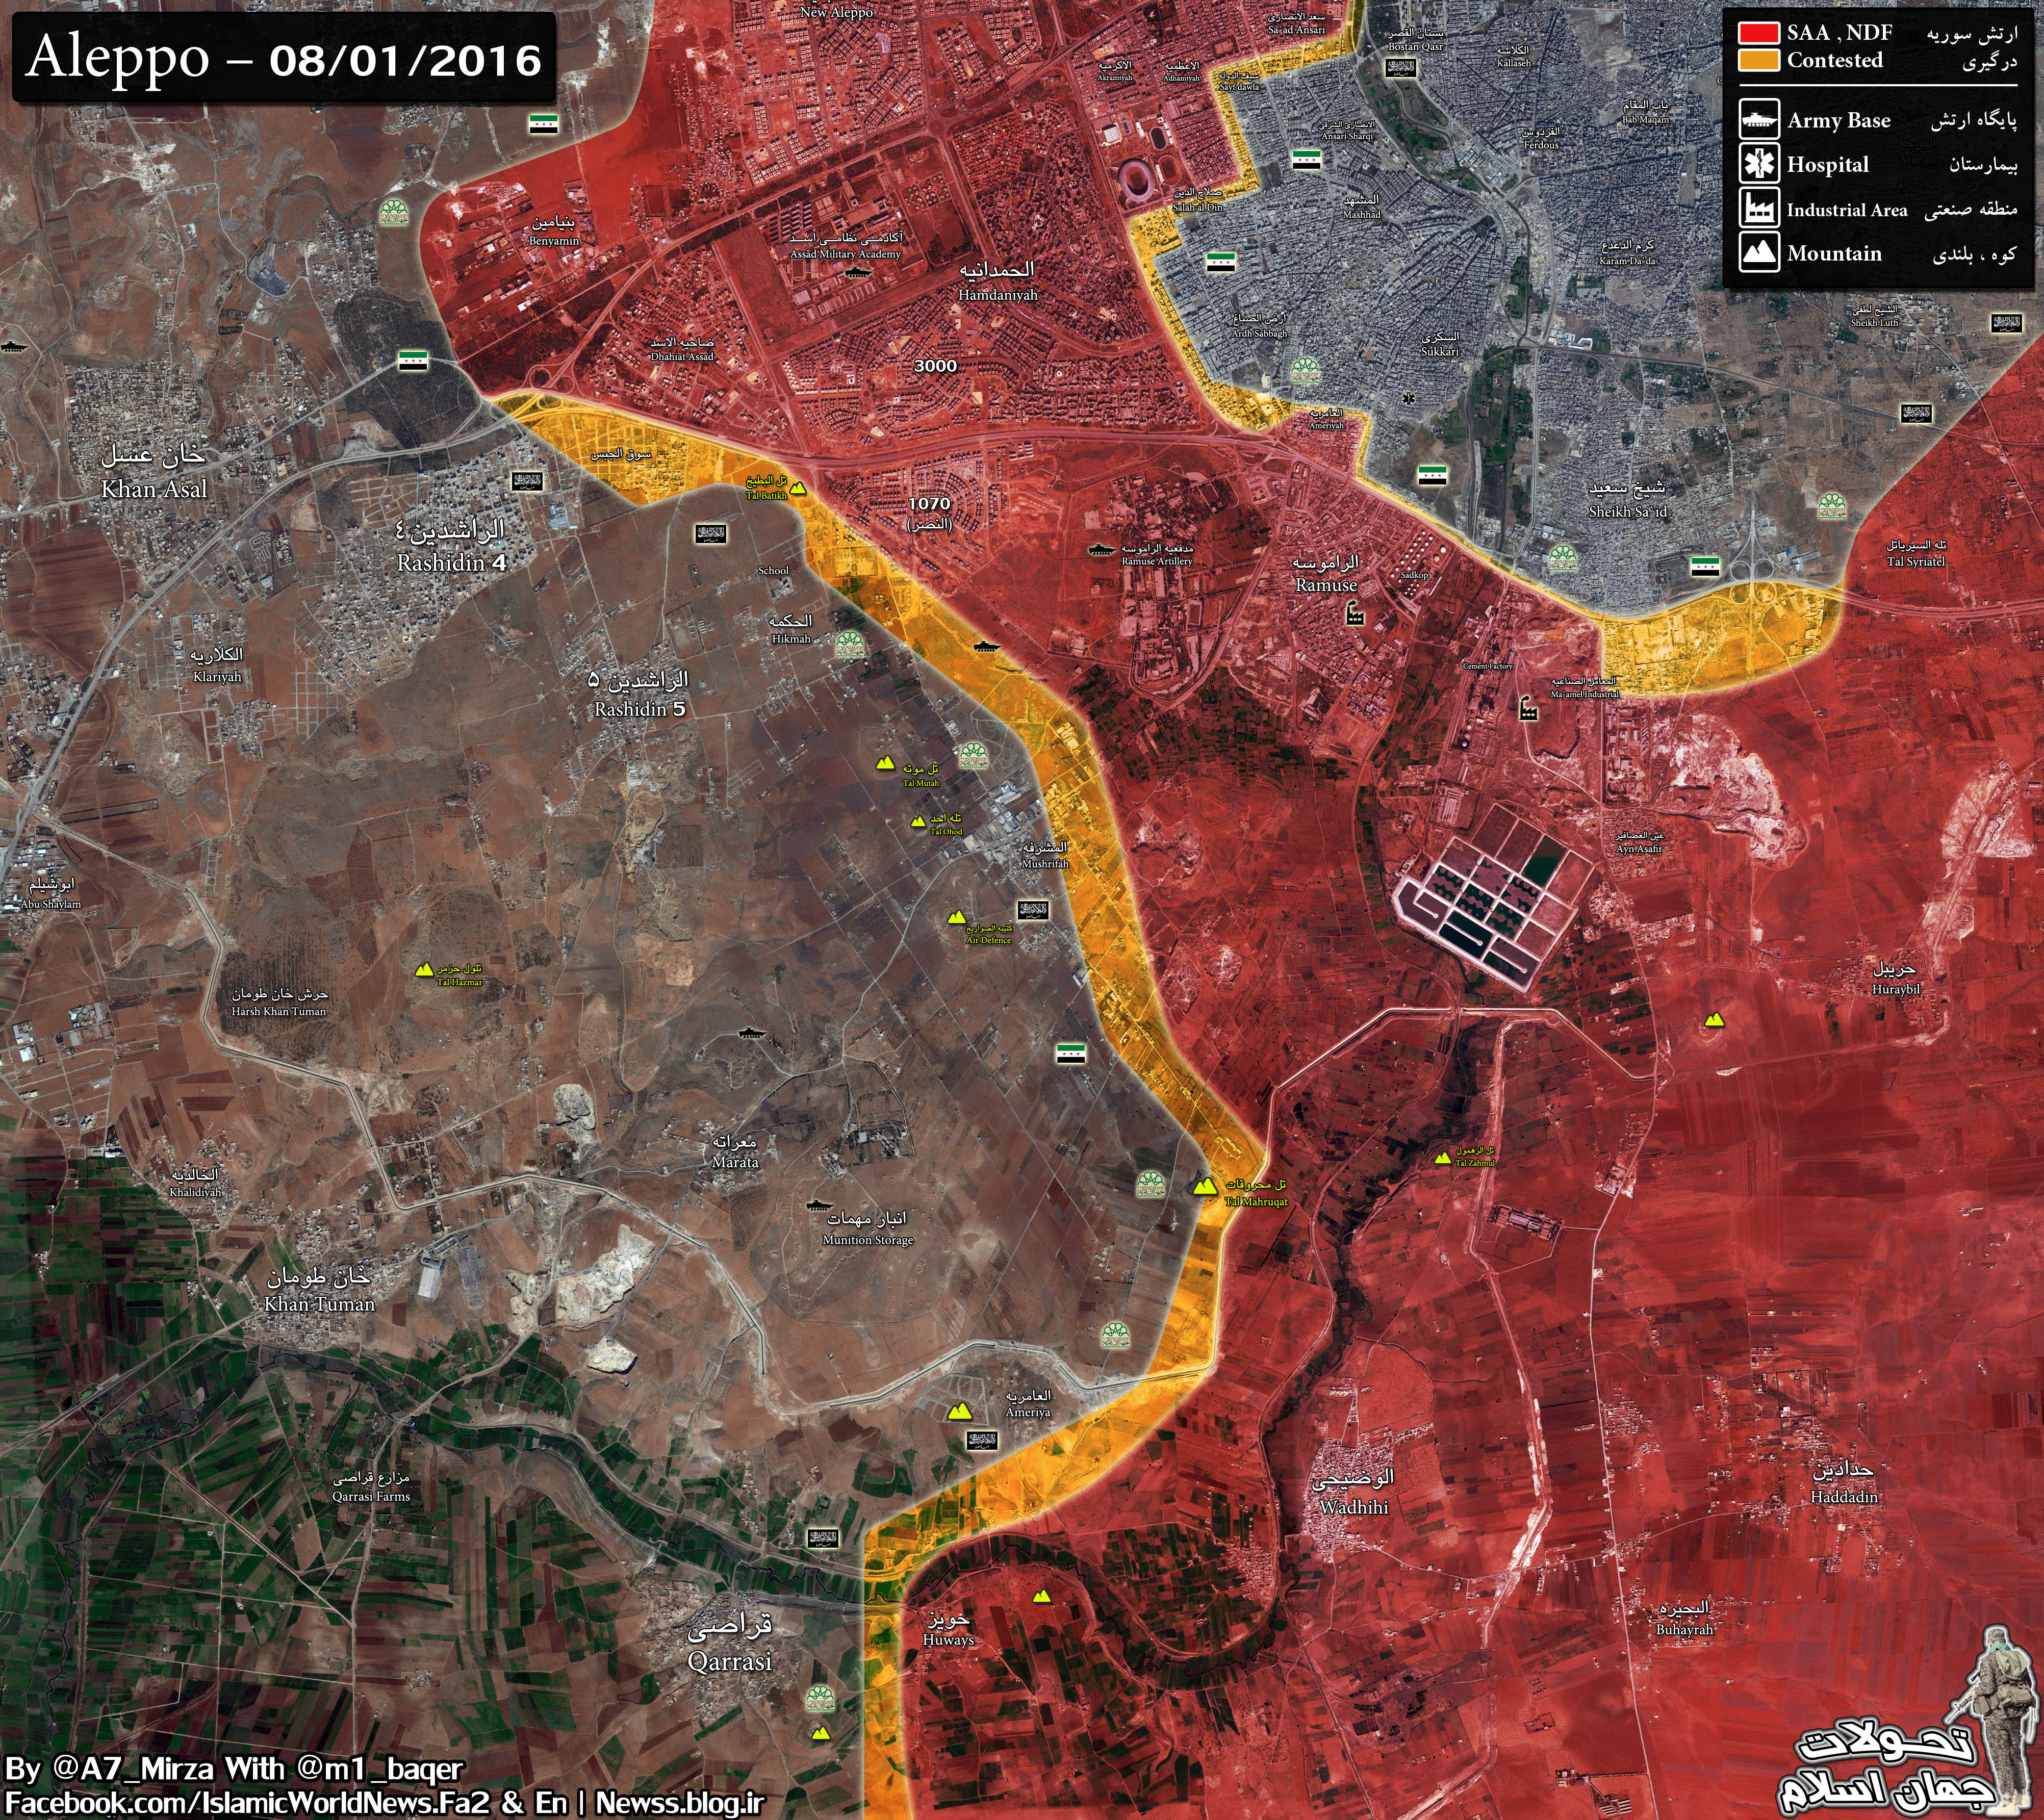 Syrian Army Developing Momentum in Strategic Areas of Aleppo City